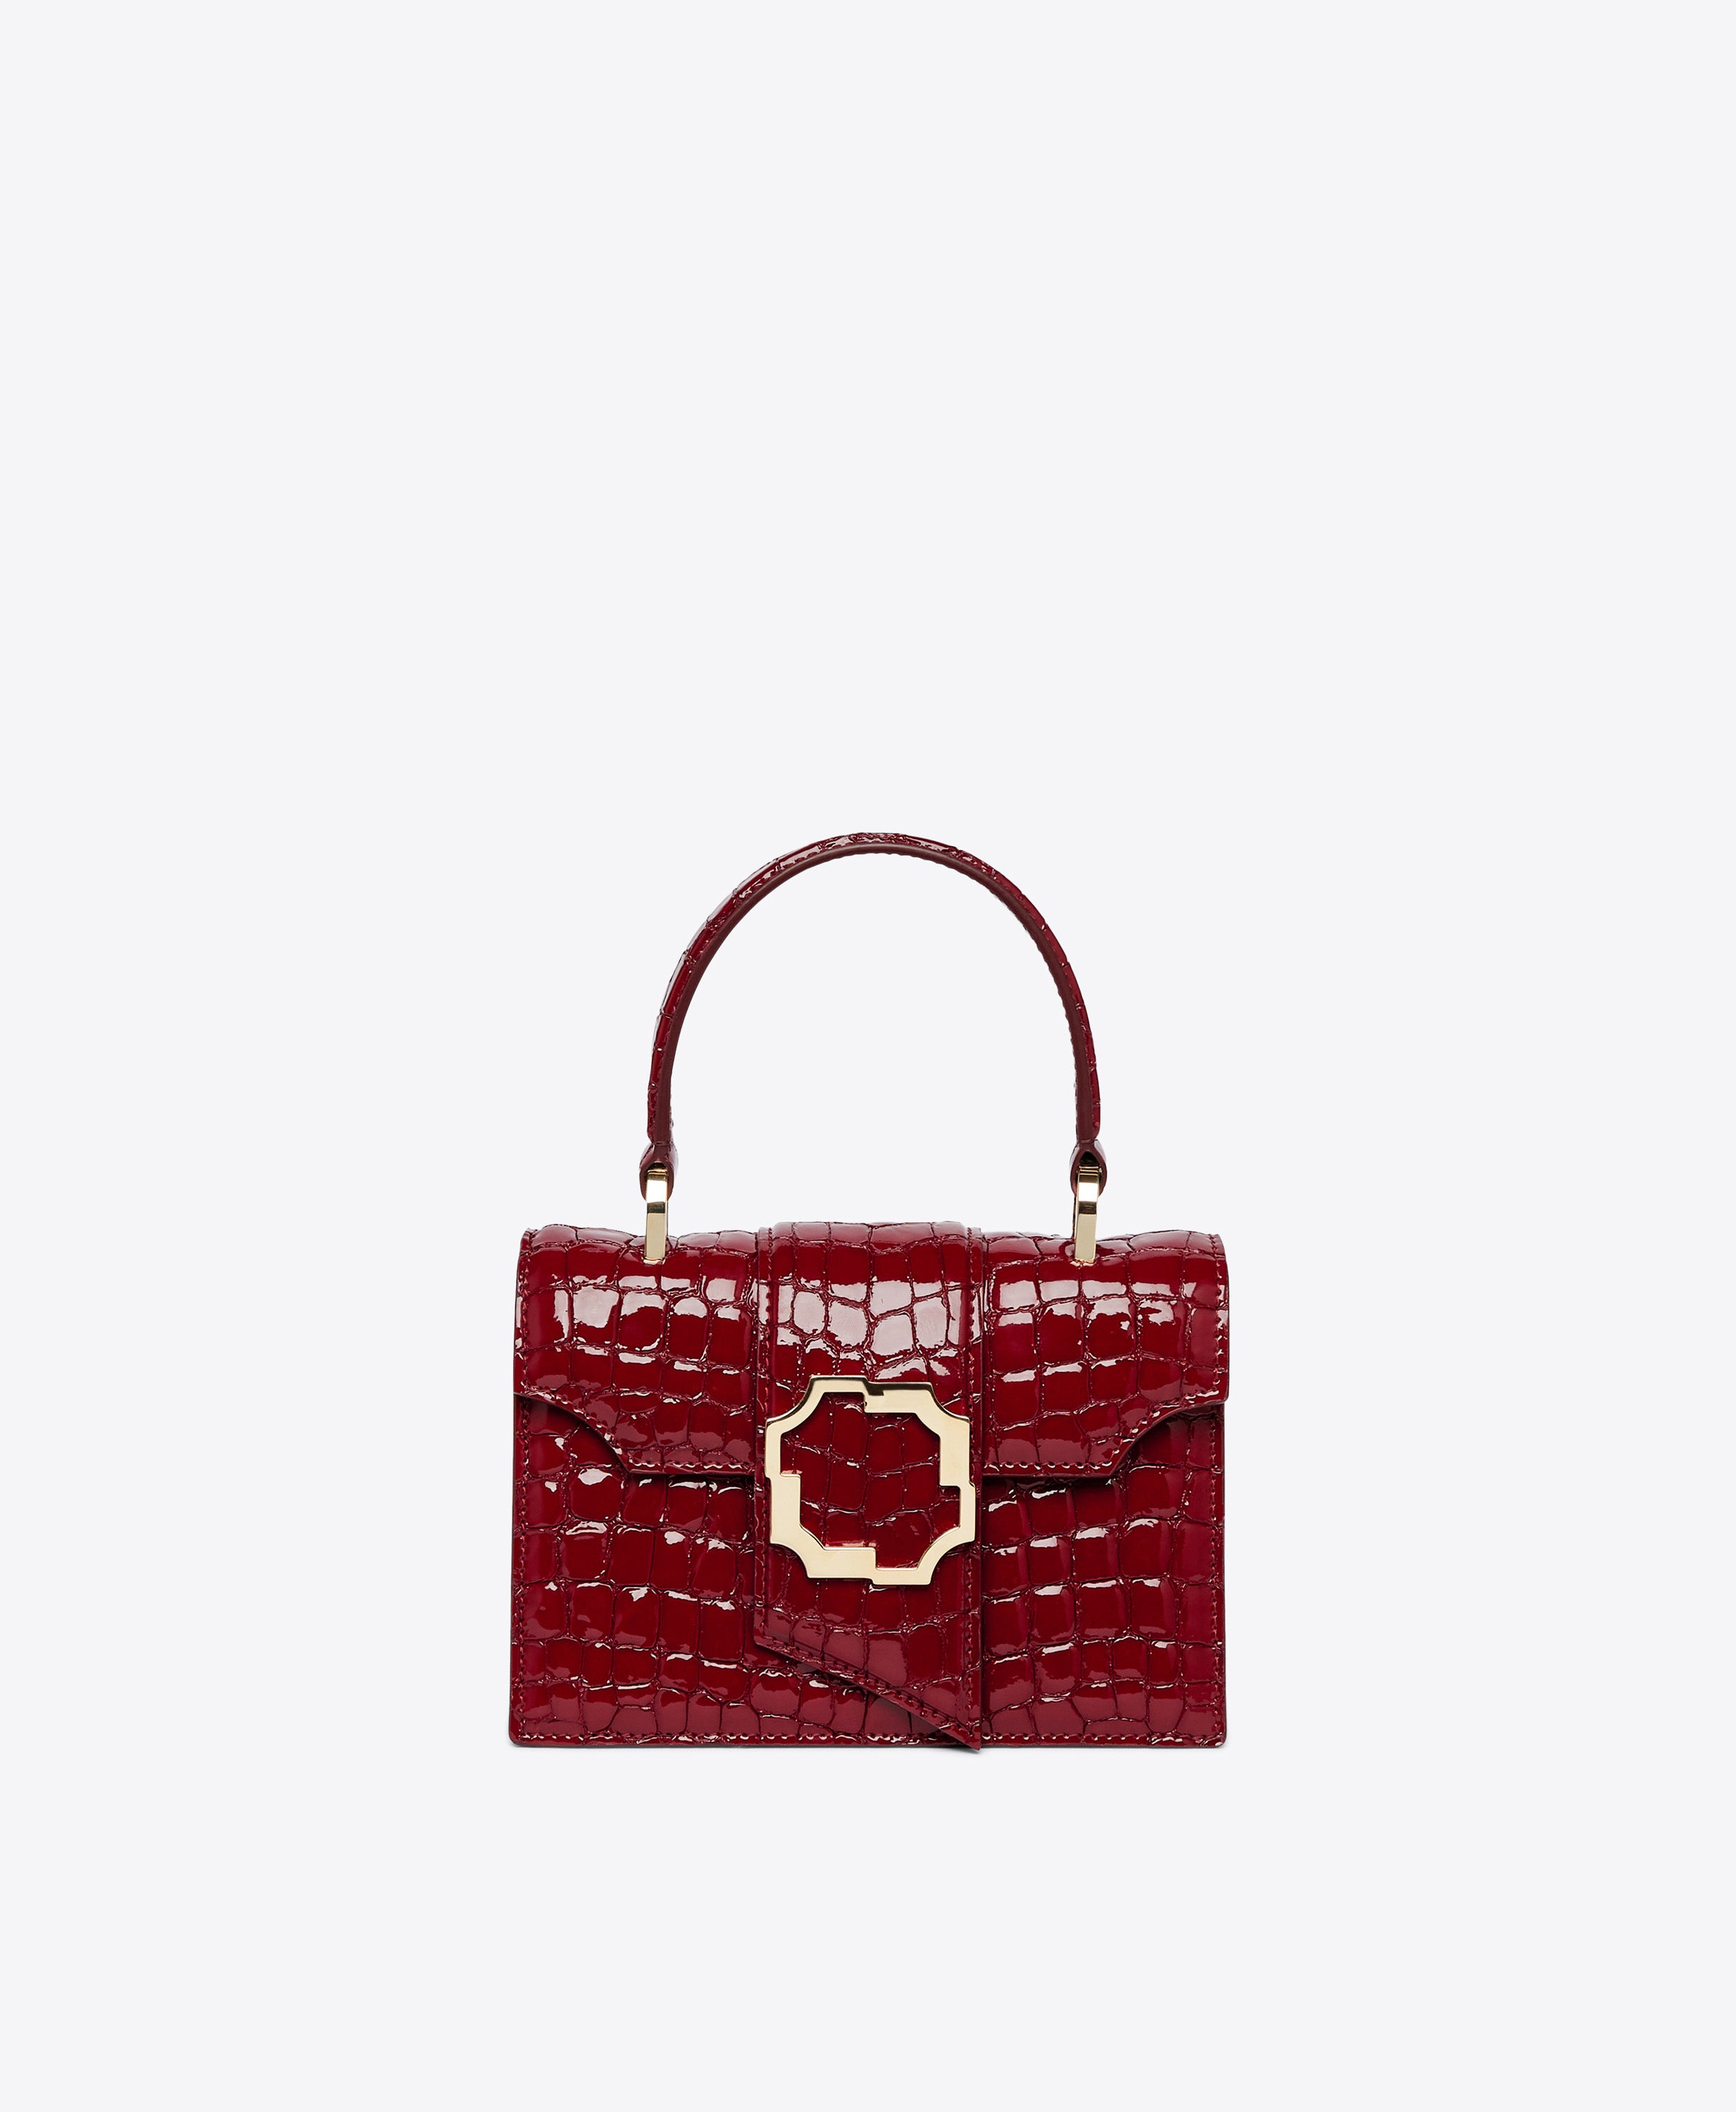 Women's Burgundy Embossed Patent Top Handle Bag with Crest Buckle